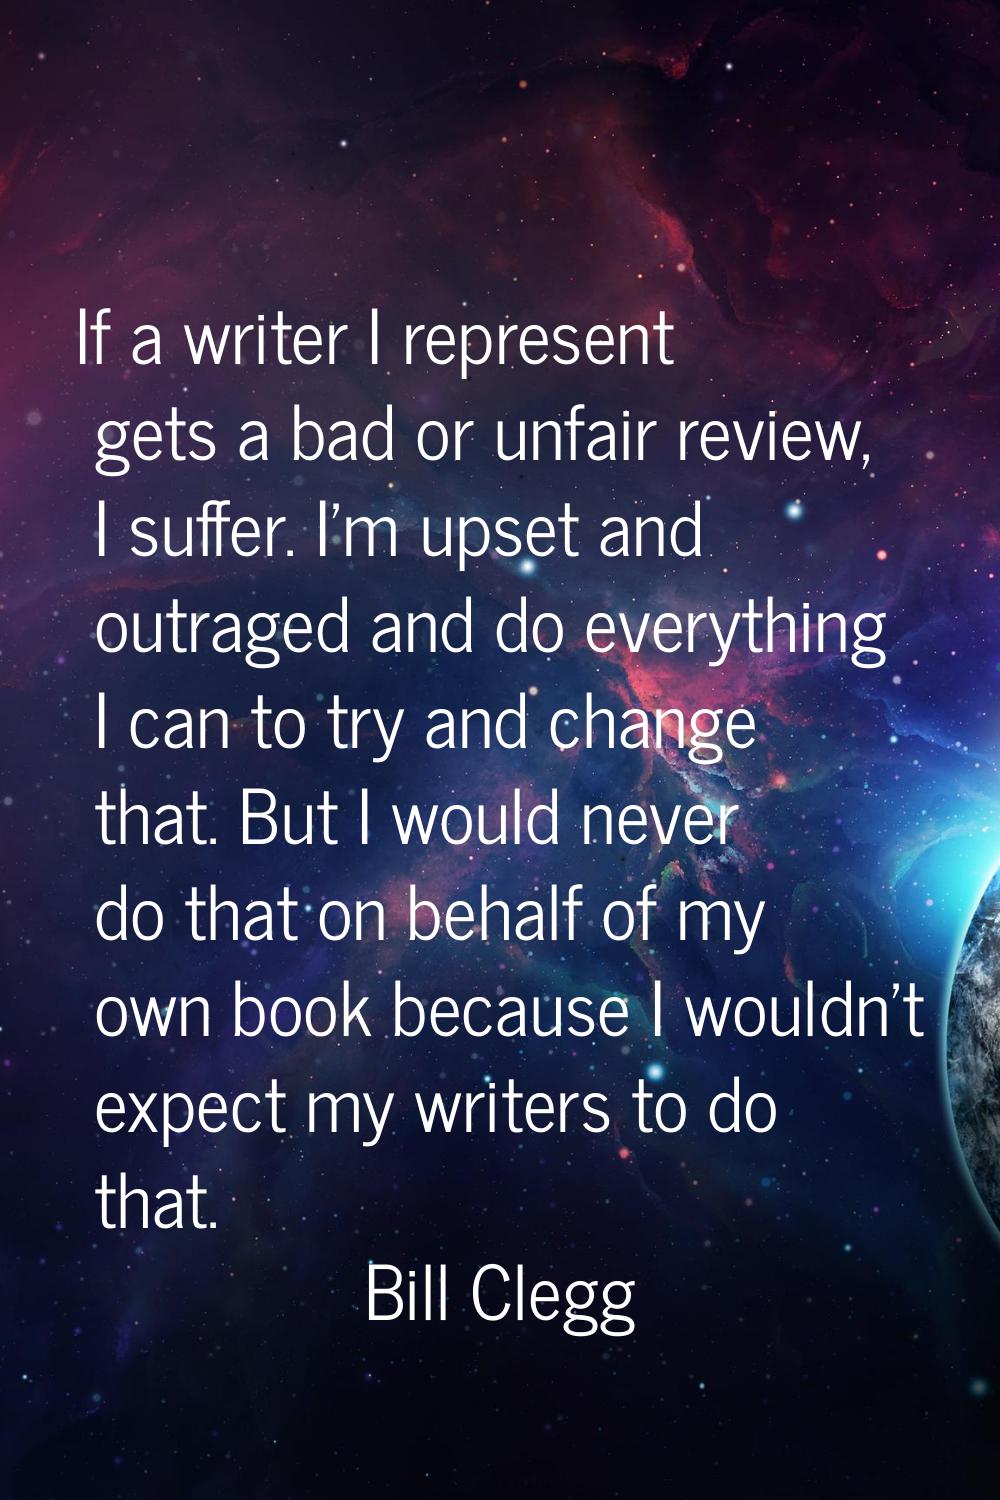 If a writer I represent gets a bad or unfair review, I suffer. I'm upset and outraged and do everyt